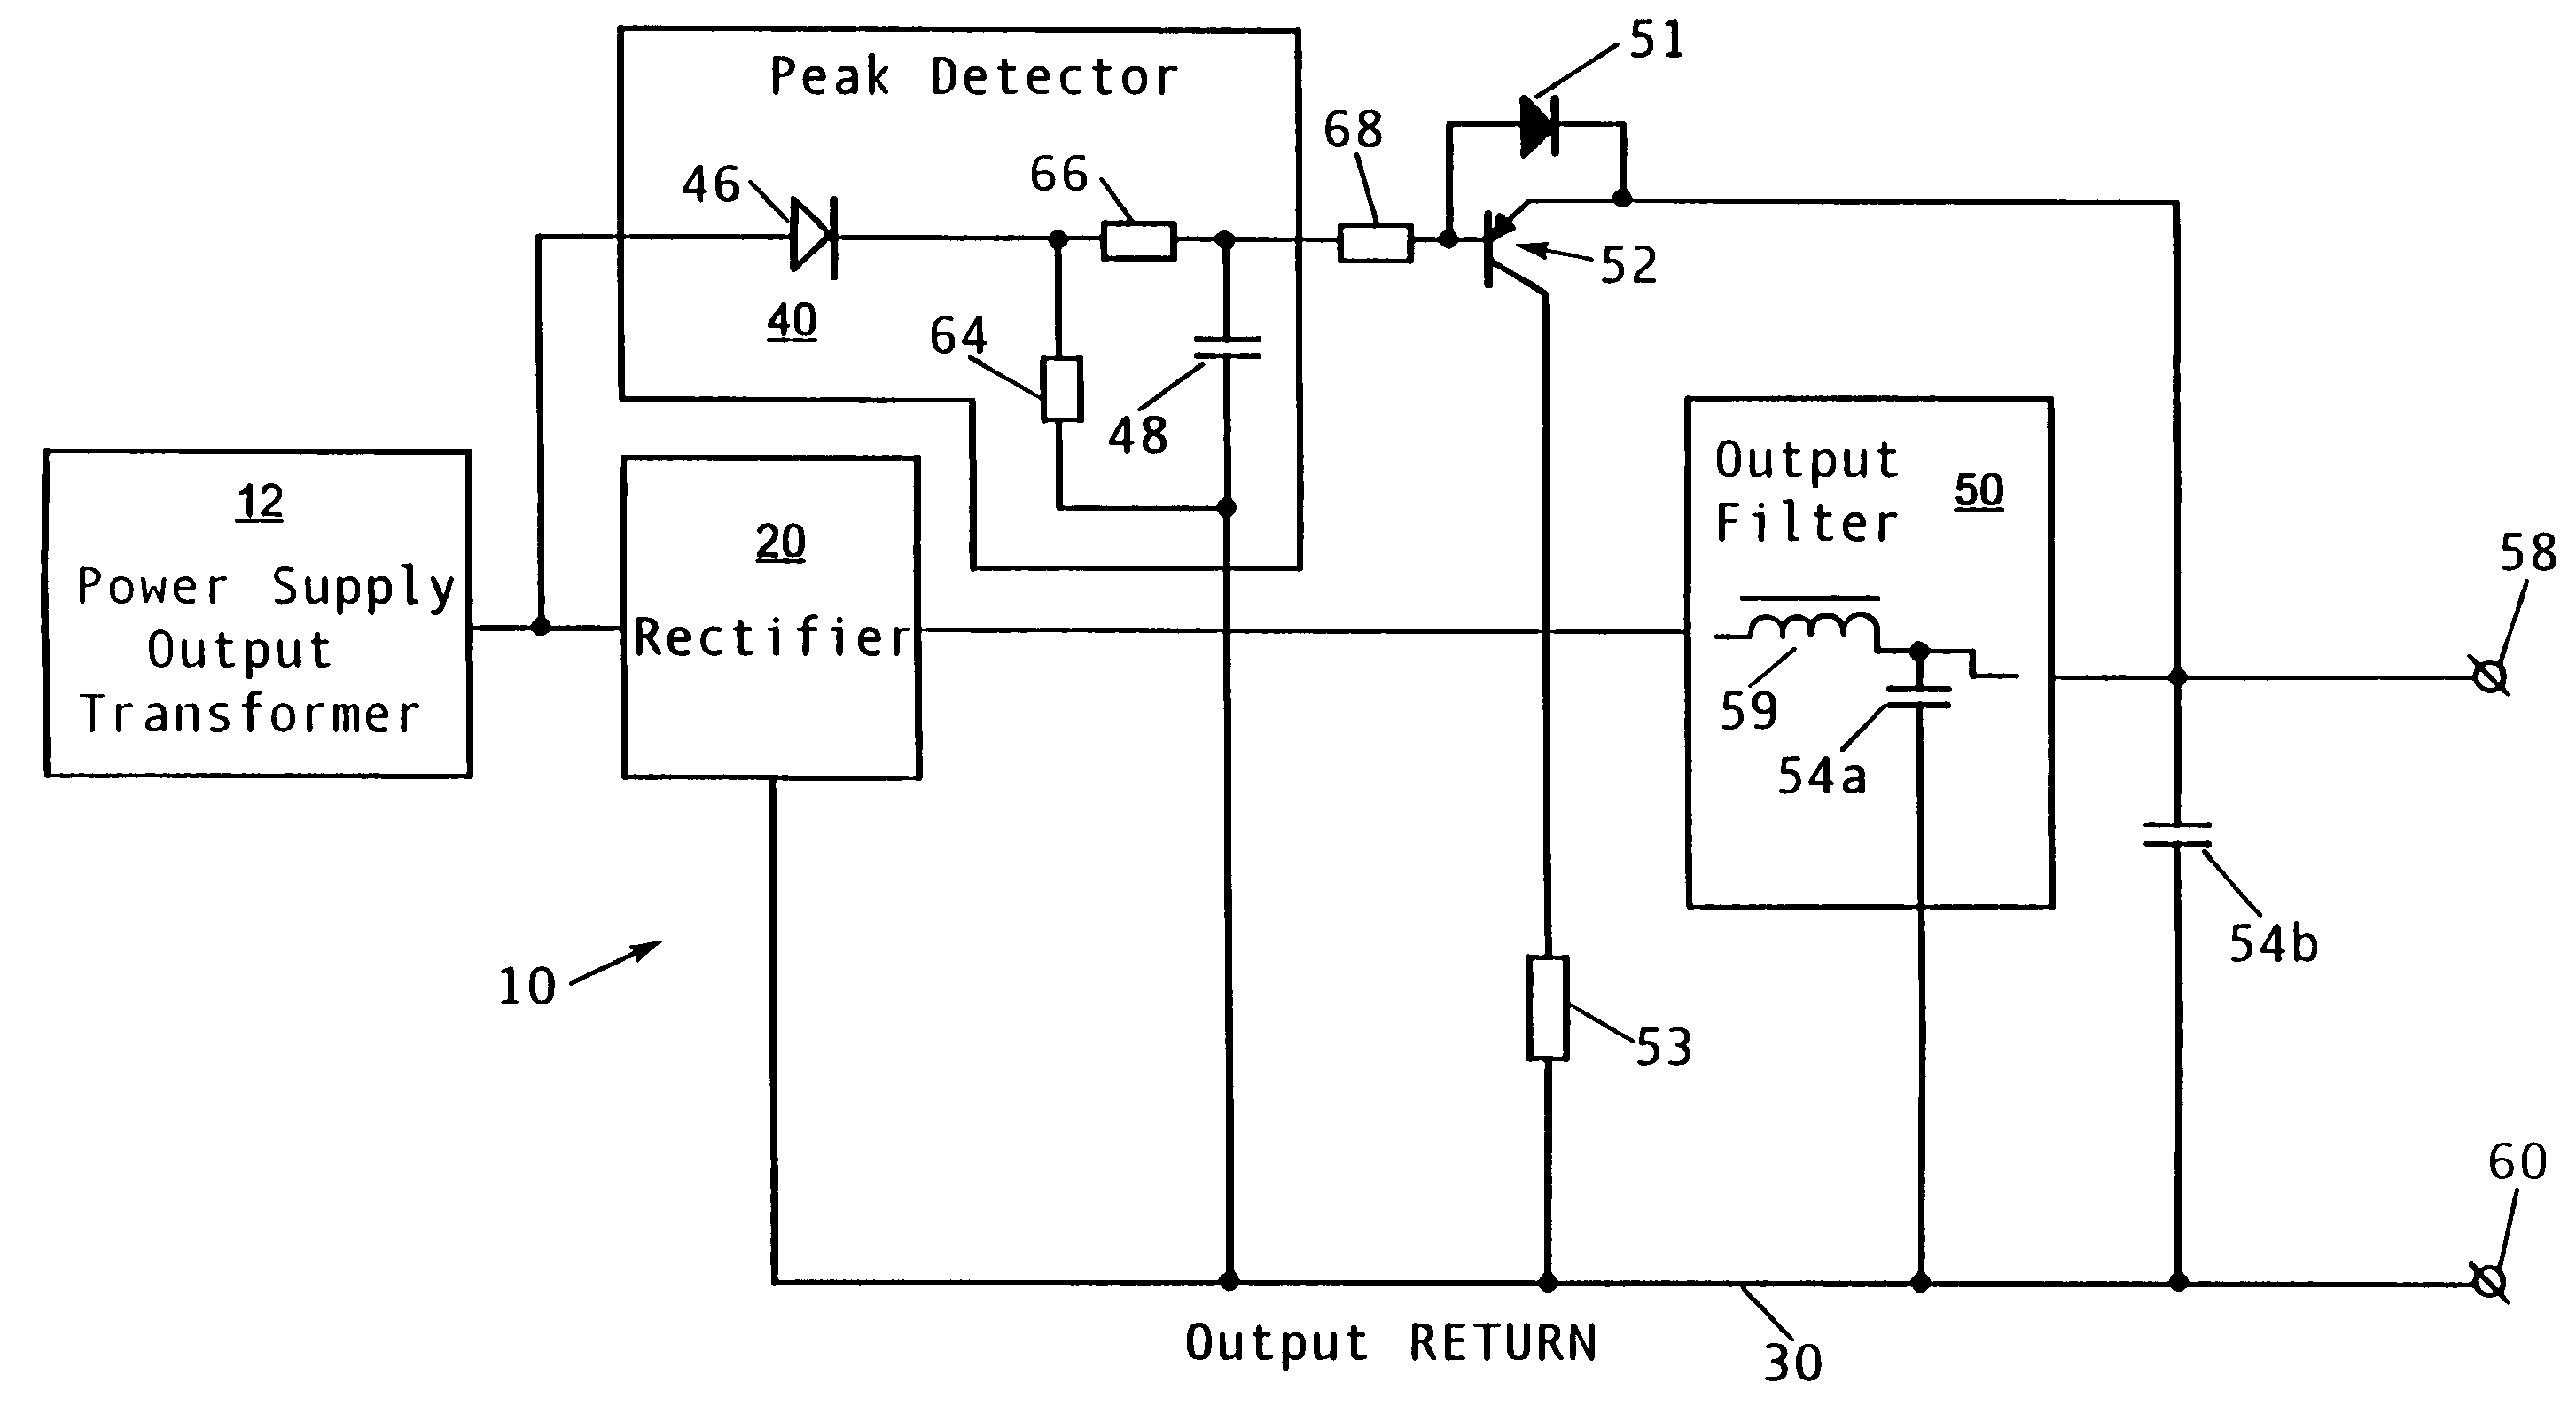 Automatic capacitor discharge for power supplies